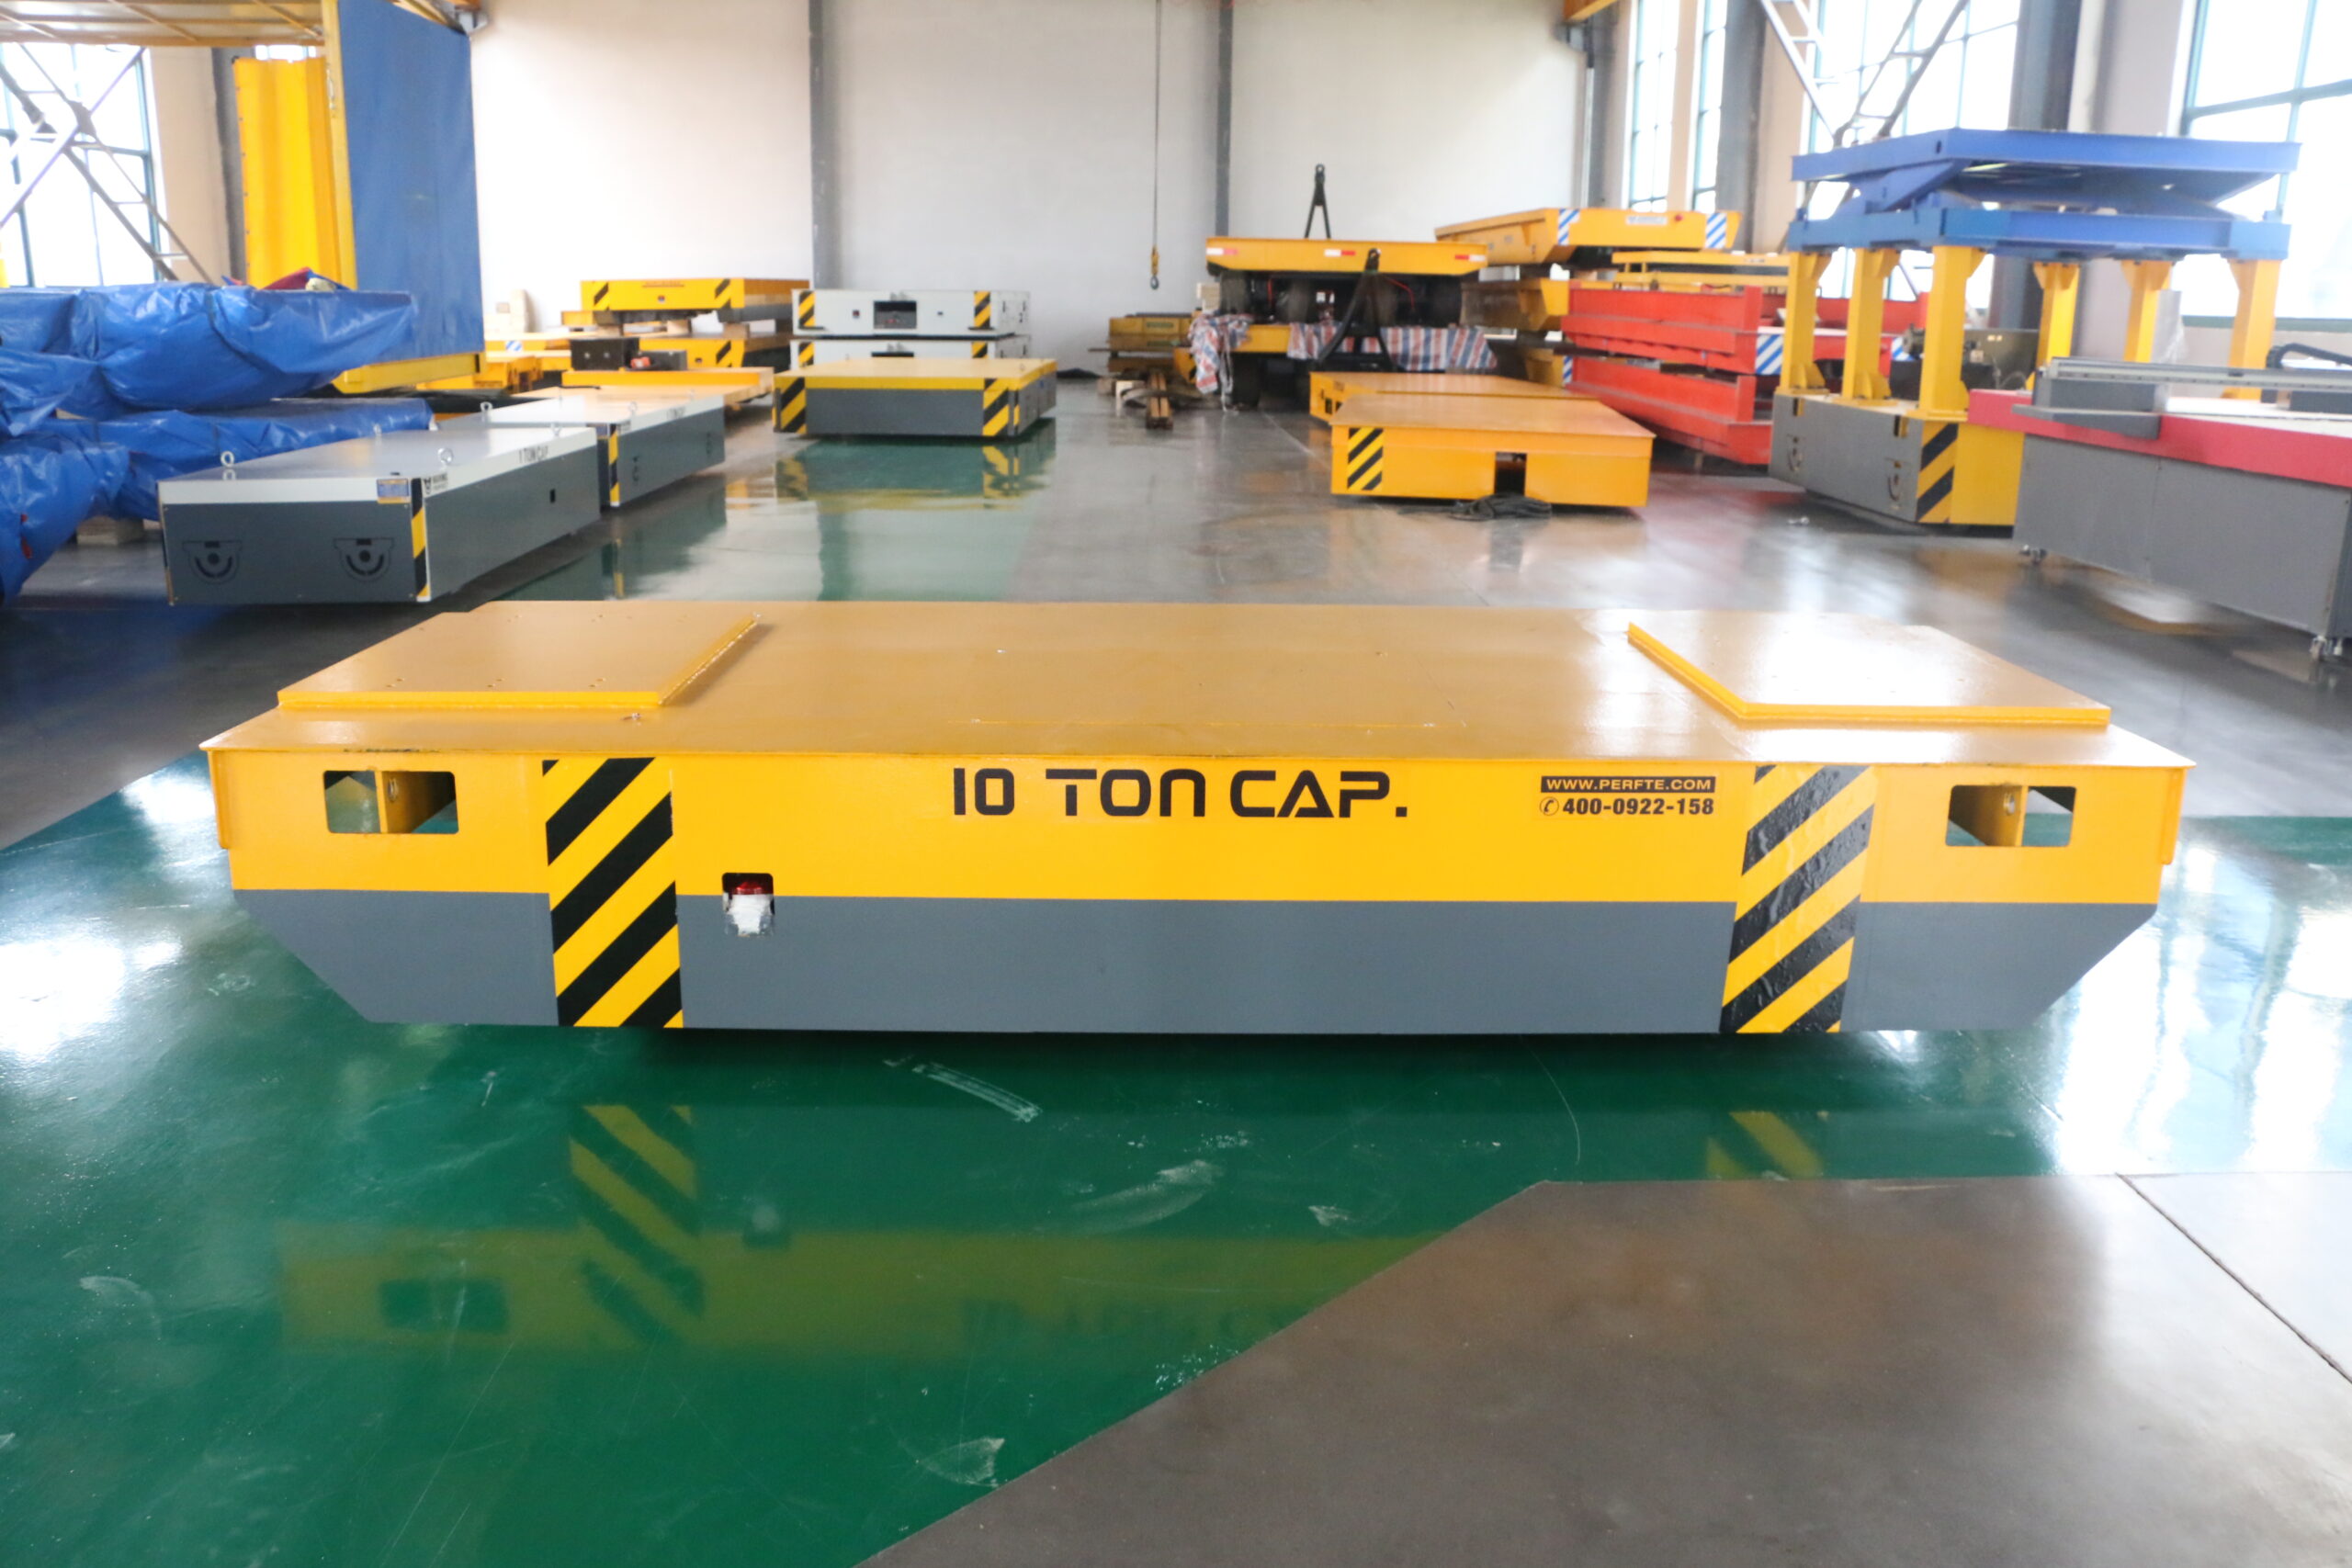 Rail transfer cart carrying a weight of 10 tons tools